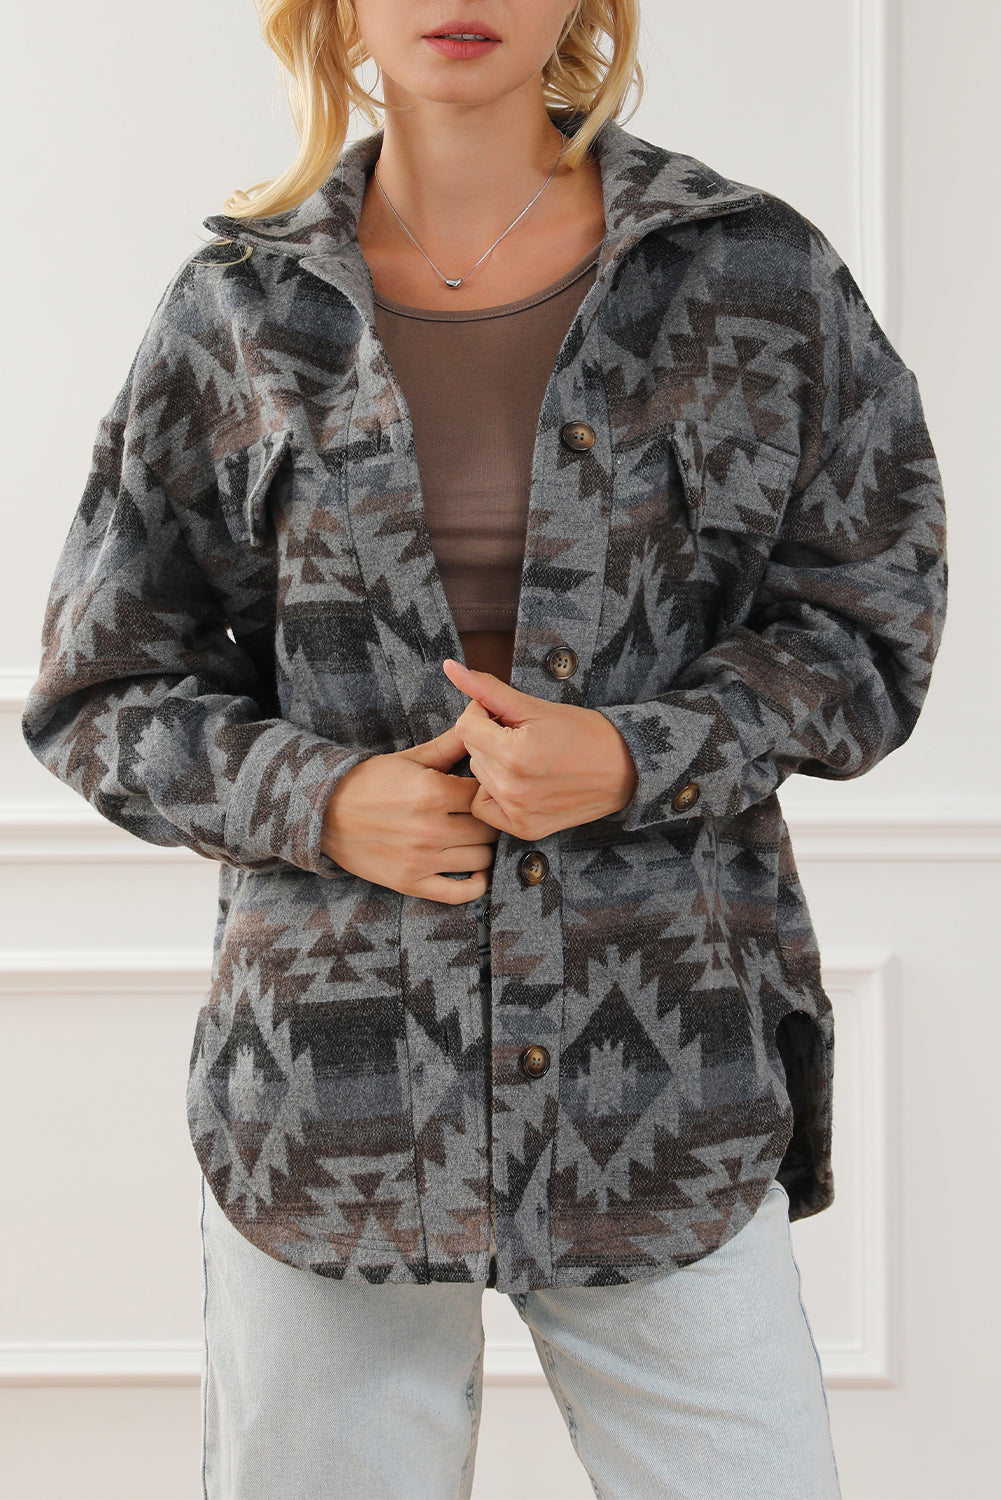 Gray Western Aztec Print Drop Shoulder Casual Shacket - Dixie Hike & Style